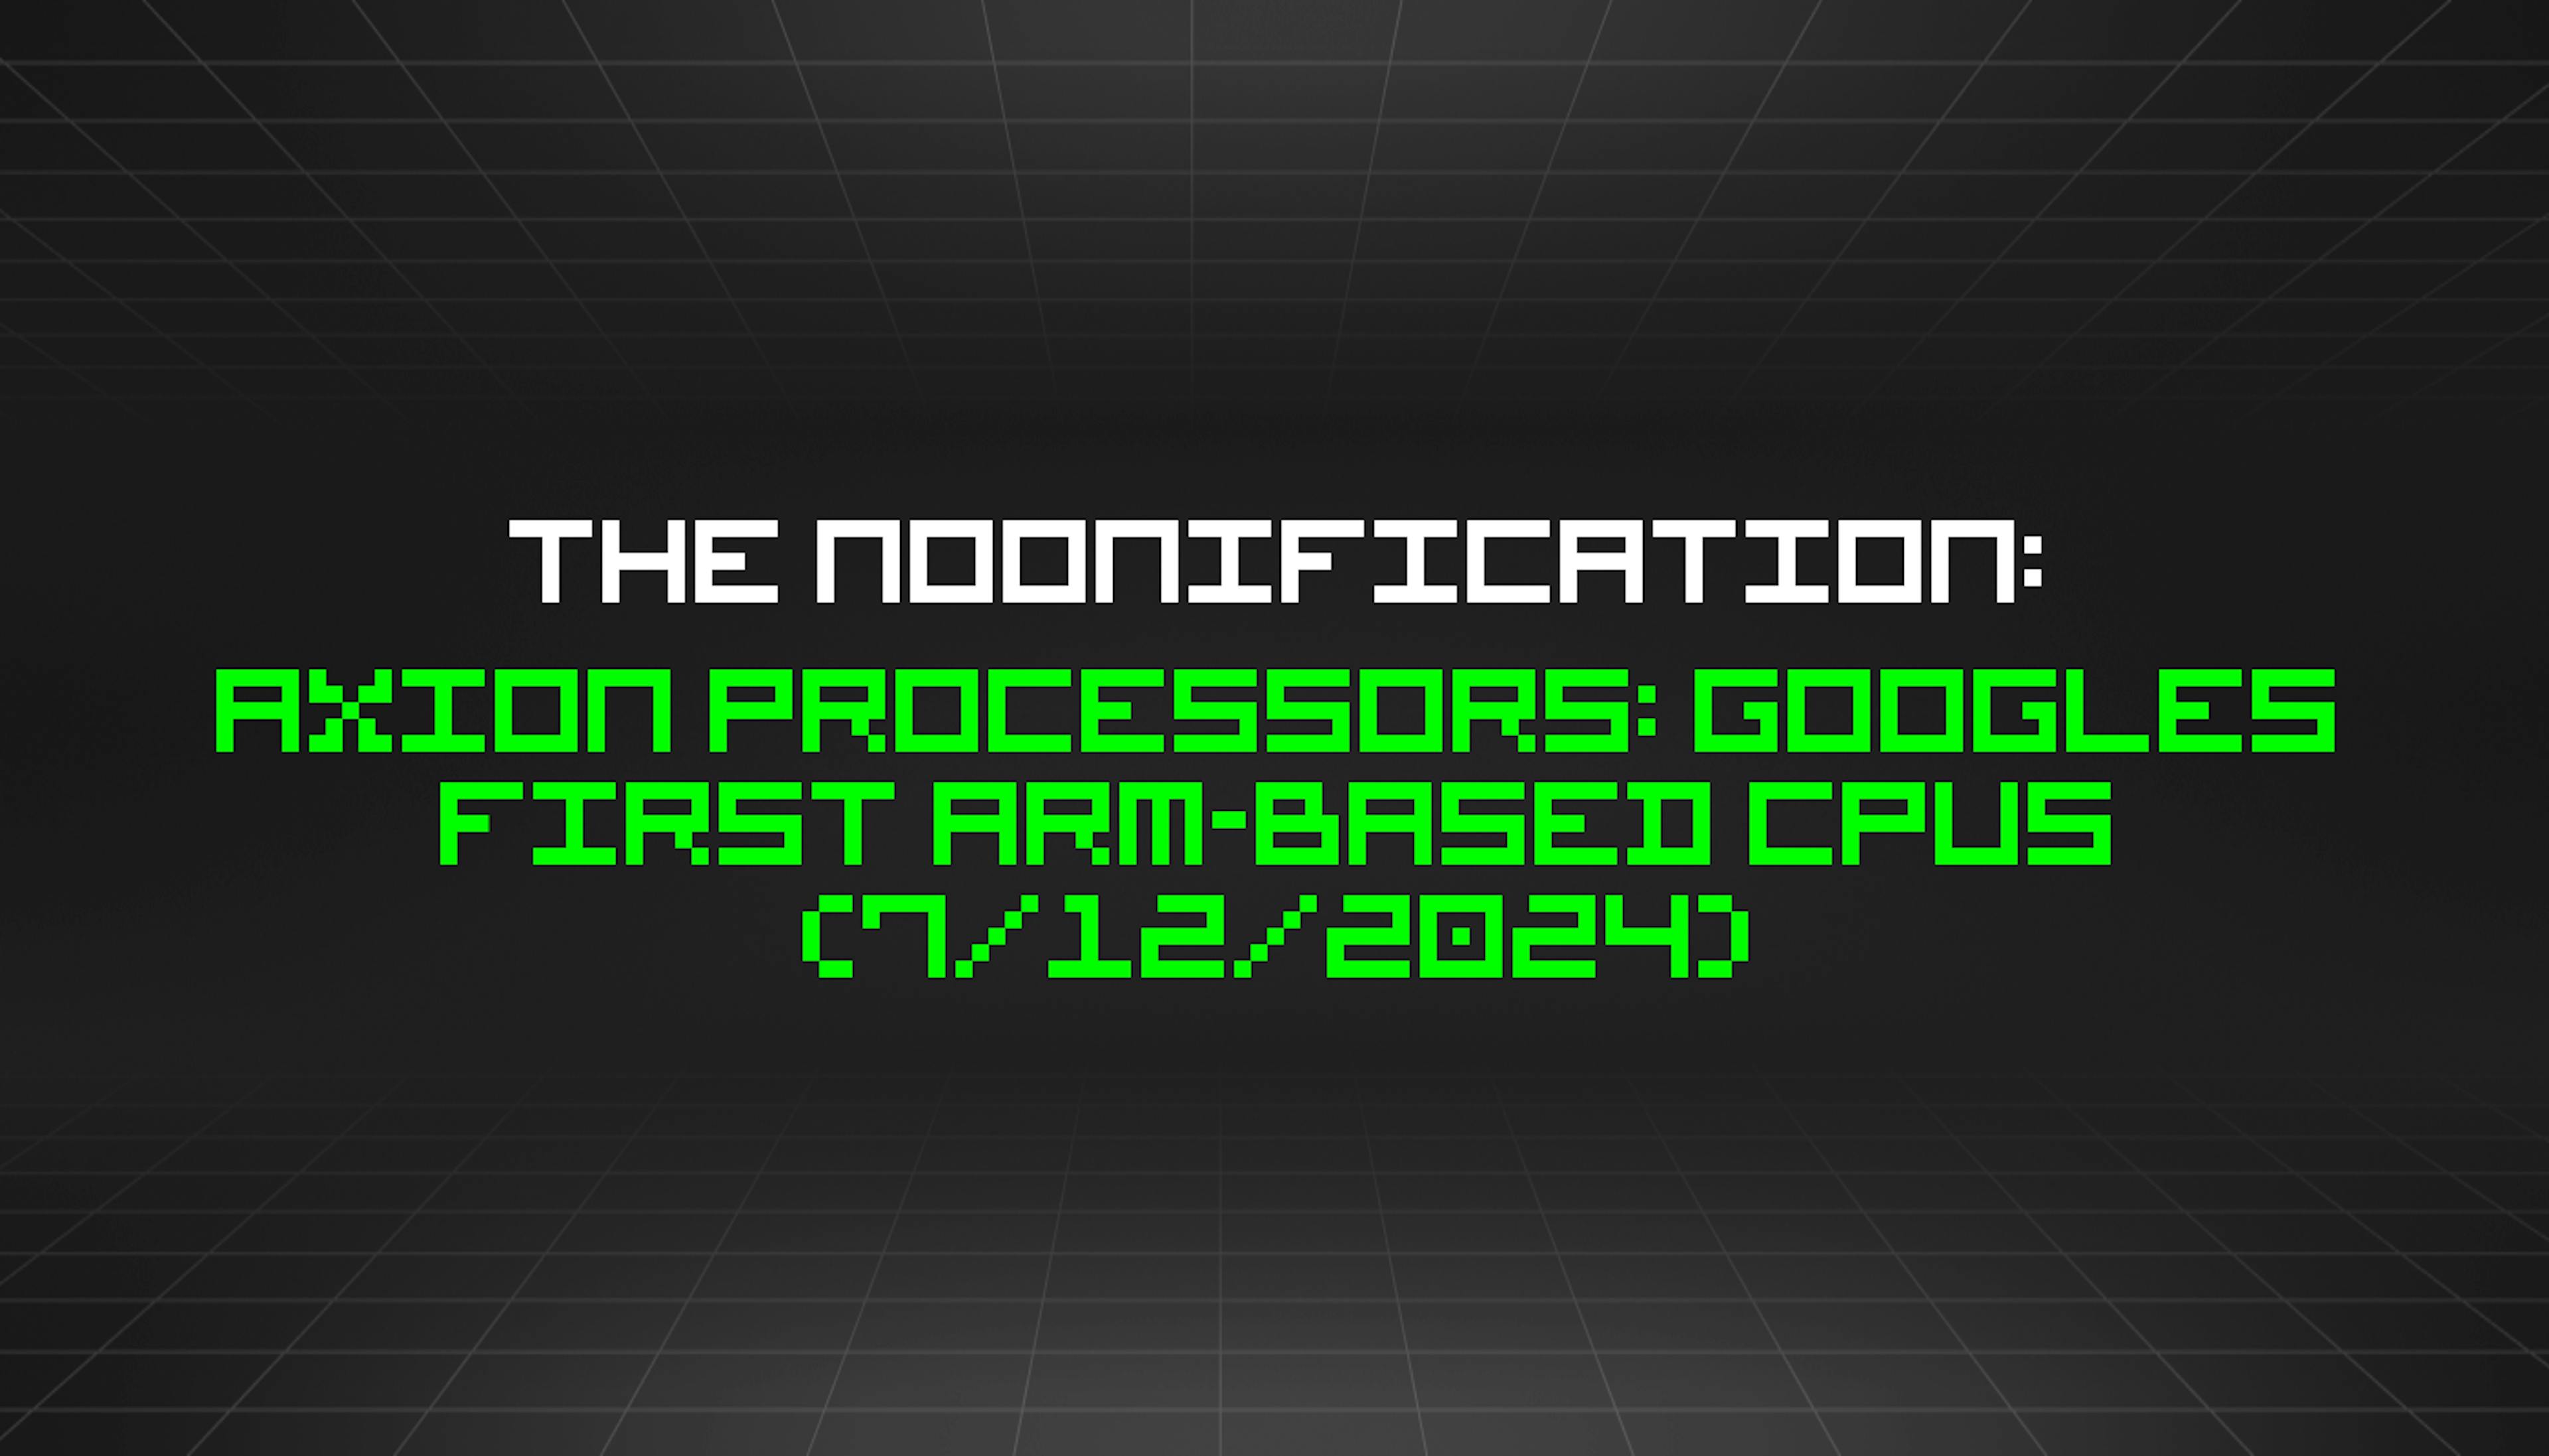 featured image - The Noonification: Axion Processors: Googles First Arm-based CPUs (7/12/2024)